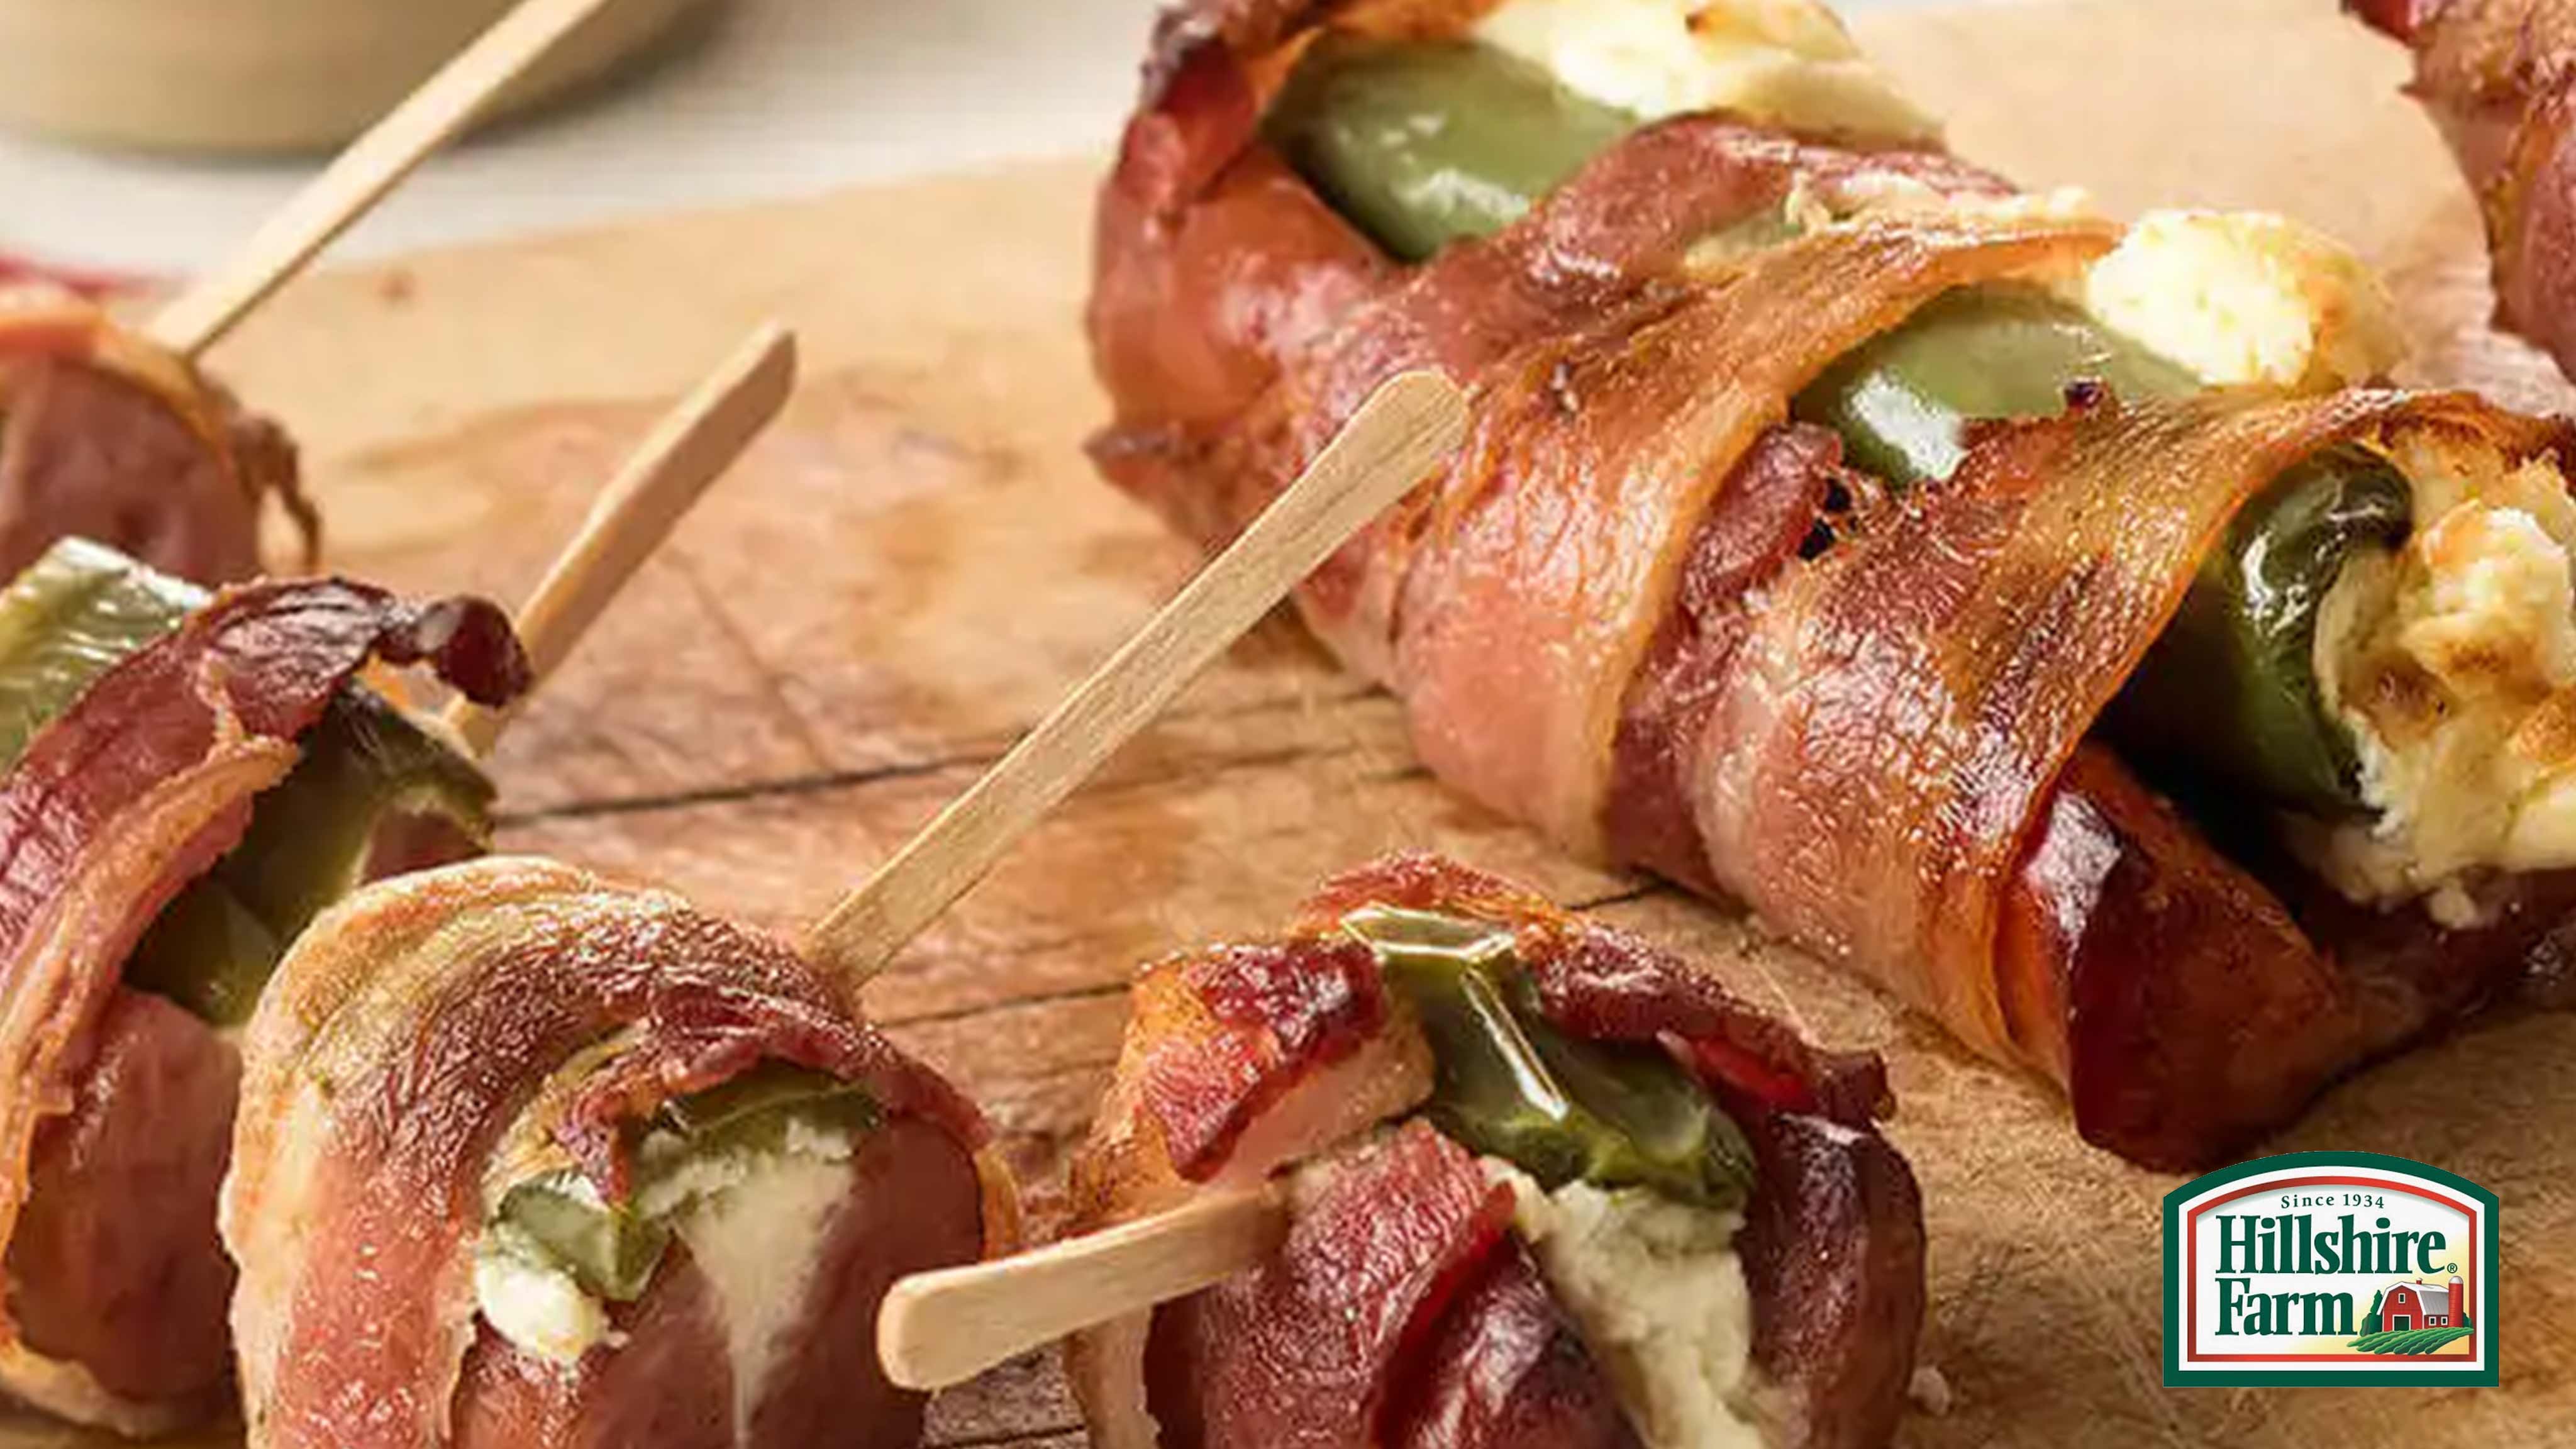 Image for Recipe Jalapeno Poppers with Hillshire Farm® Smoked Sausage